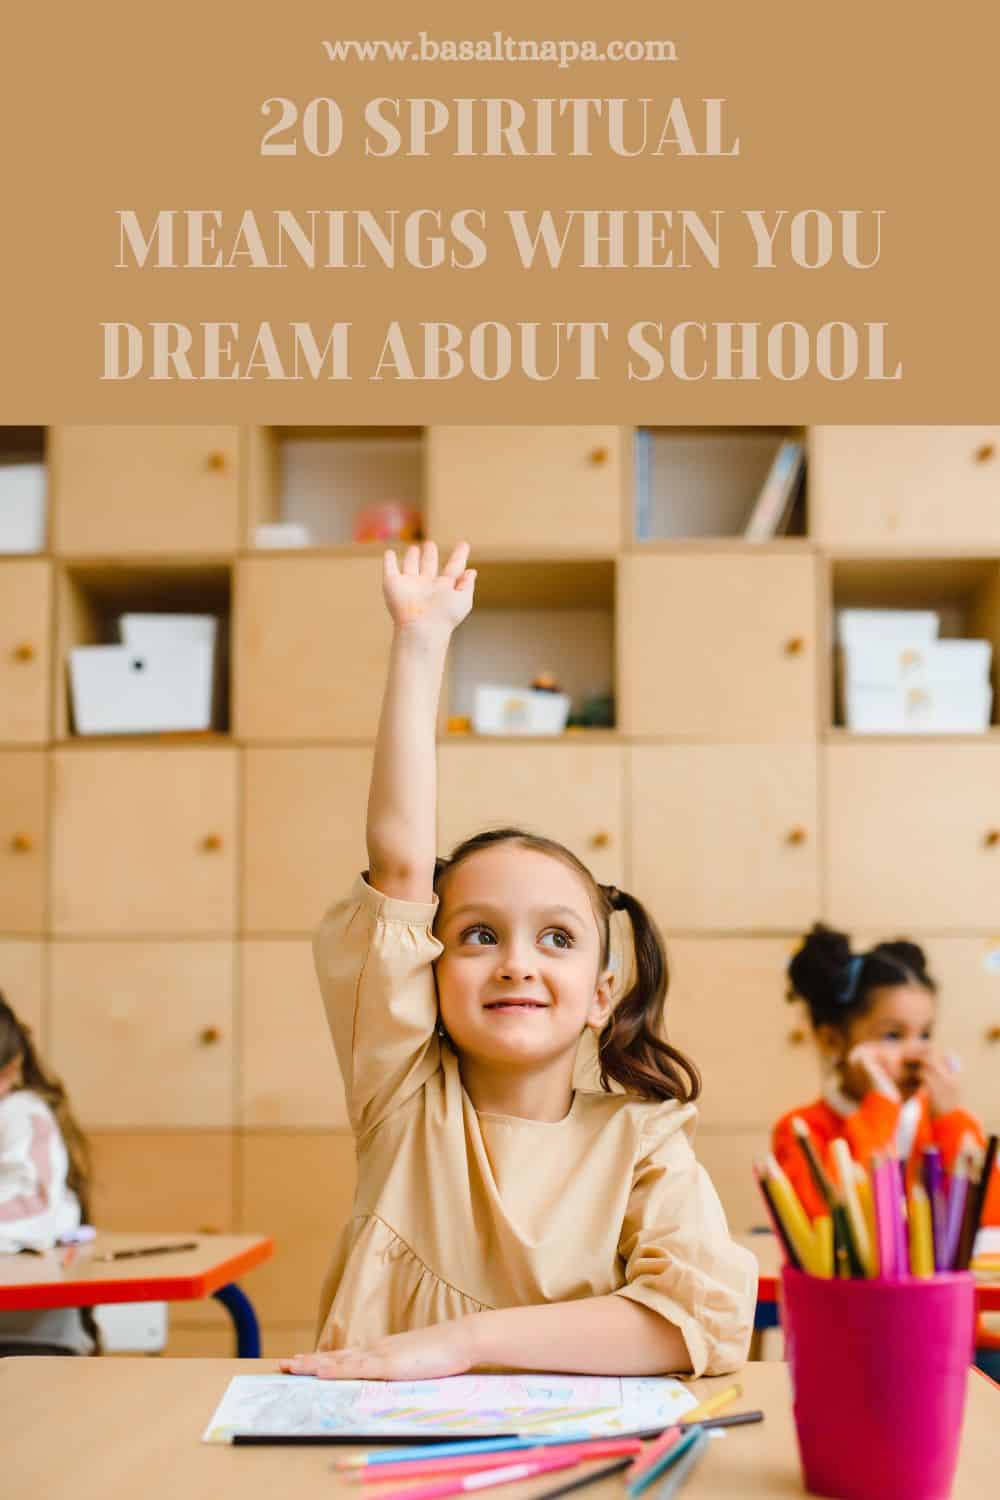 20 Spiritual Meanings When You Dream About School